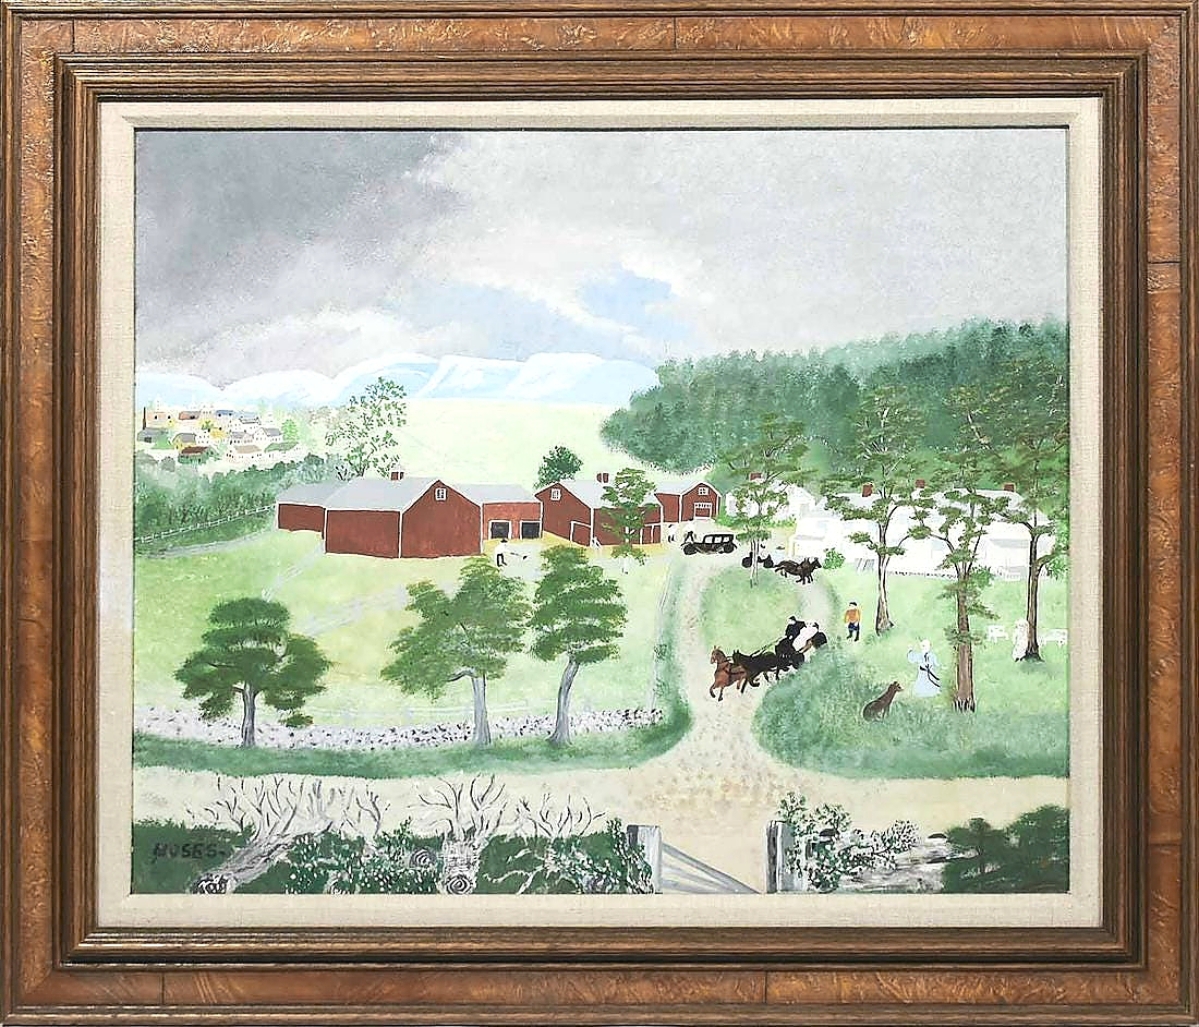 The Moses family was well-represented in this sale. The second highest price of the day was achieved by Grandma Moses’ “Grandma Moses Goes to The Country,” signed and dated 1944, which sold for $59,000. A winter scene by her daughter, Winona Moses Fisher, sold for $2,360 and there was also a set of paintings by her nephew, Wilfred Robertson.